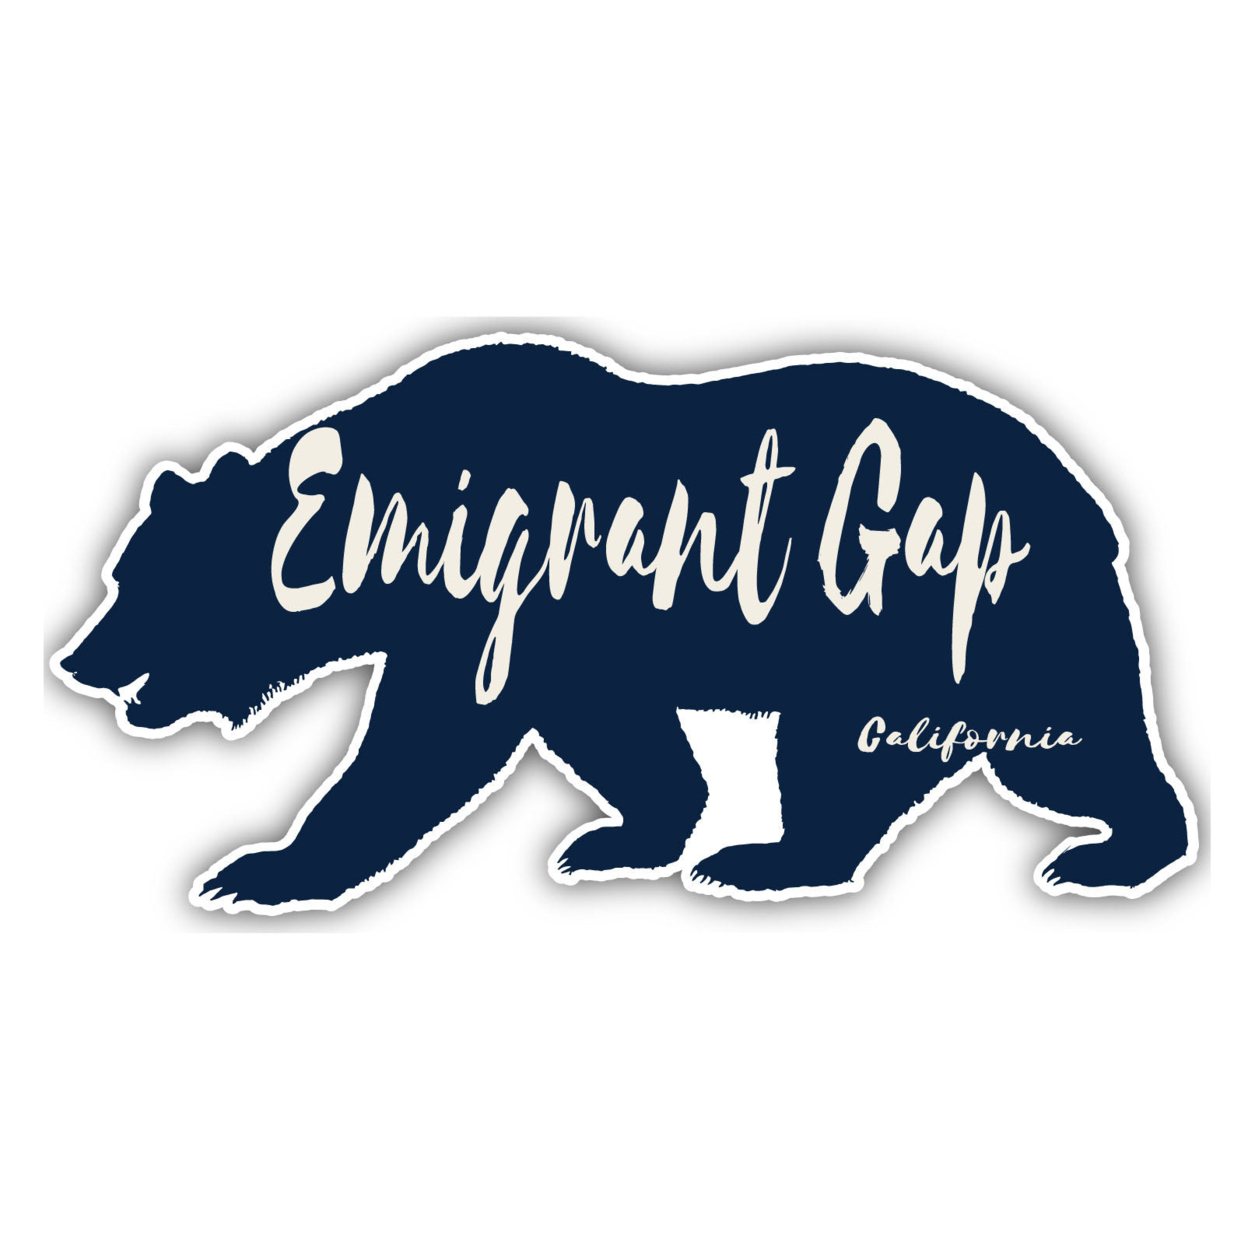 Emigrant Gap California Souvenir Decorative Stickers (Choose Theme And Size) - 4-Pack, 8-Inch, Great Outdoors